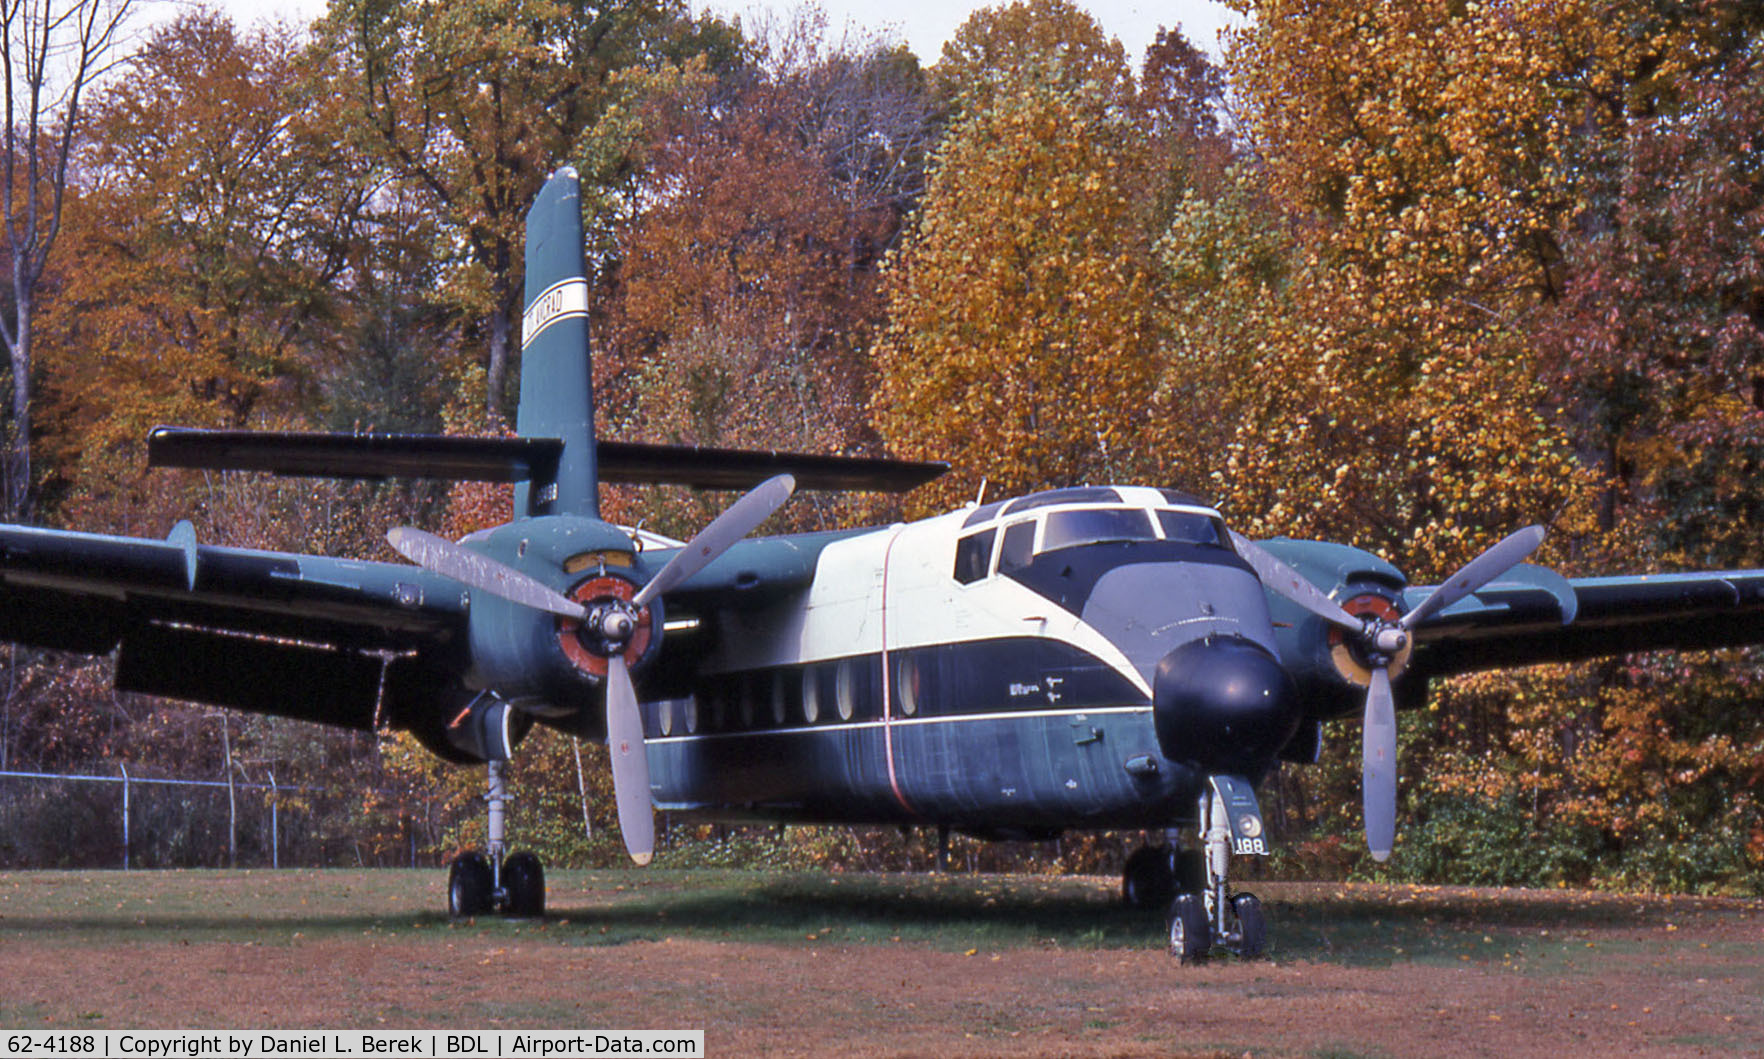 62-4188, 1962 De Havilland Canada C-7B Caribou C/N 130, Nice Caribou preserved at the New England Air Museum